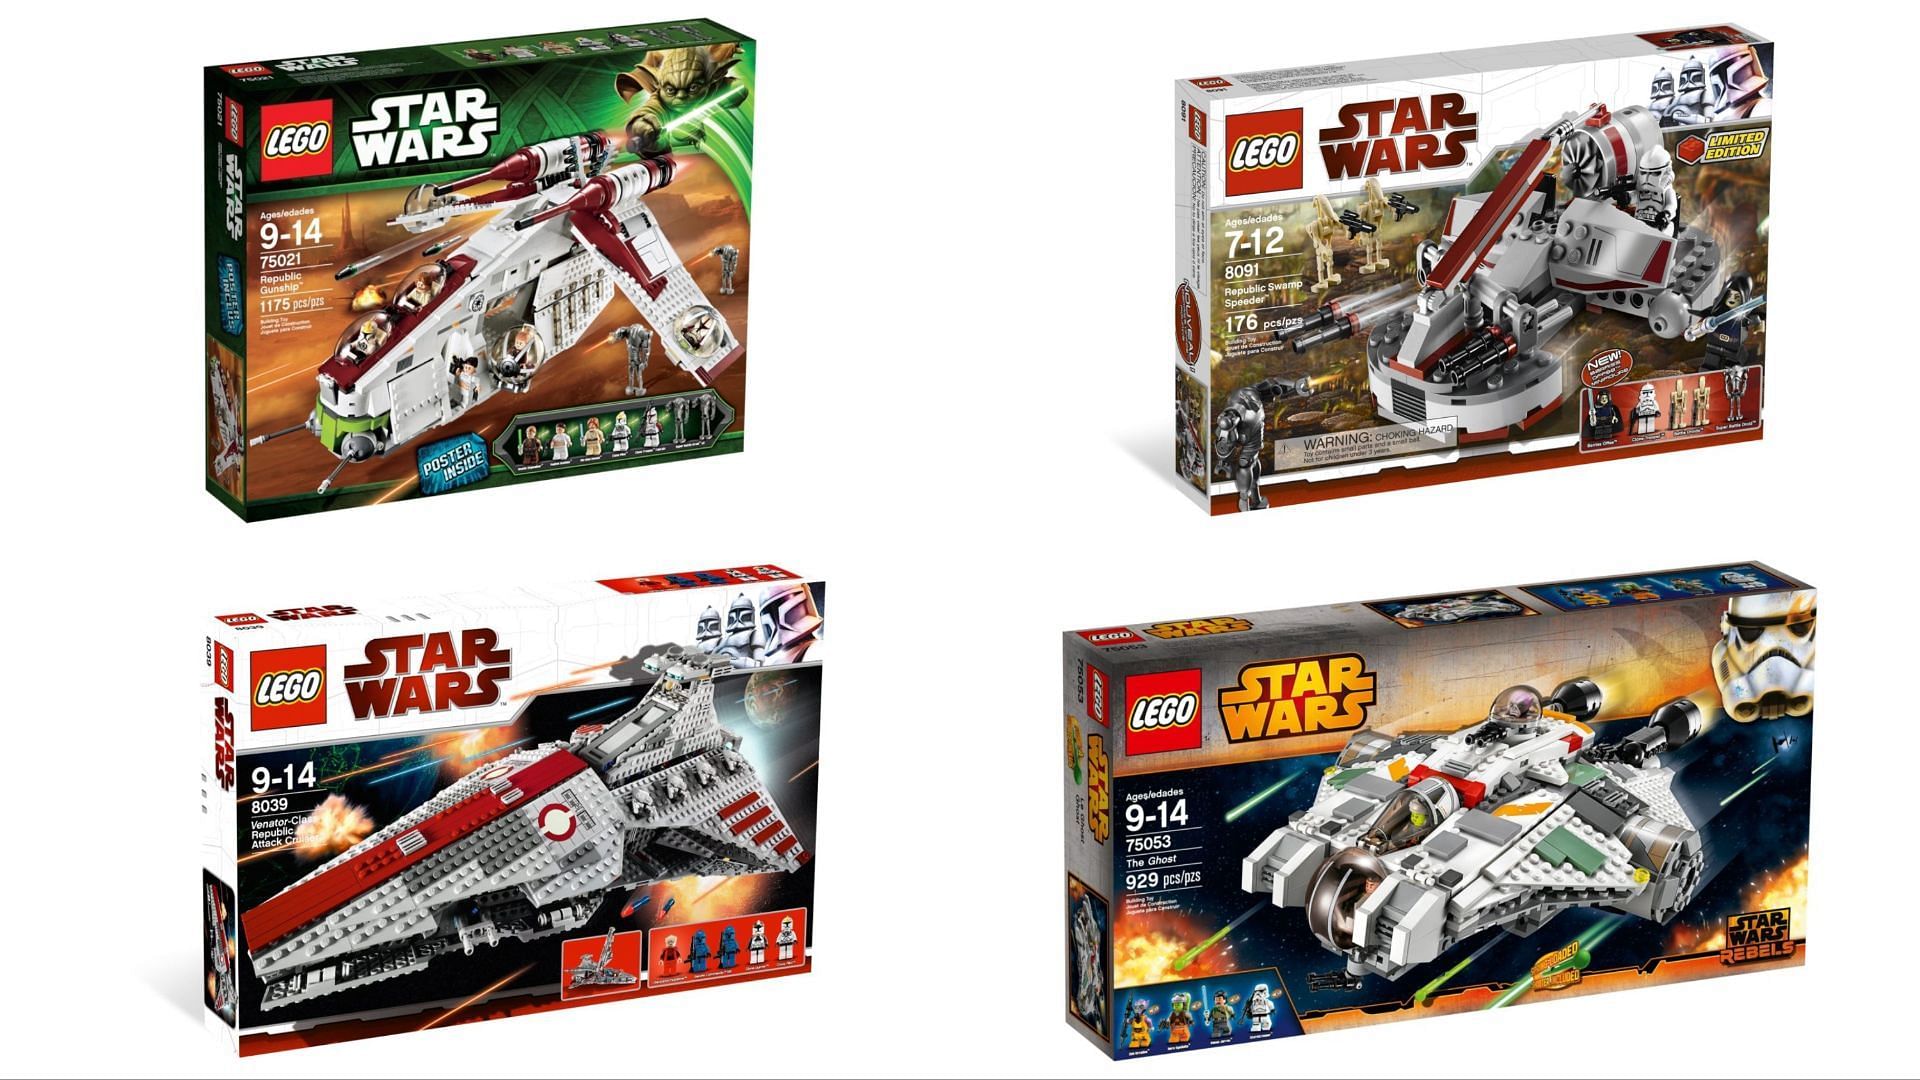 New Venator is one of the biggest Lego Star Wars kits to date